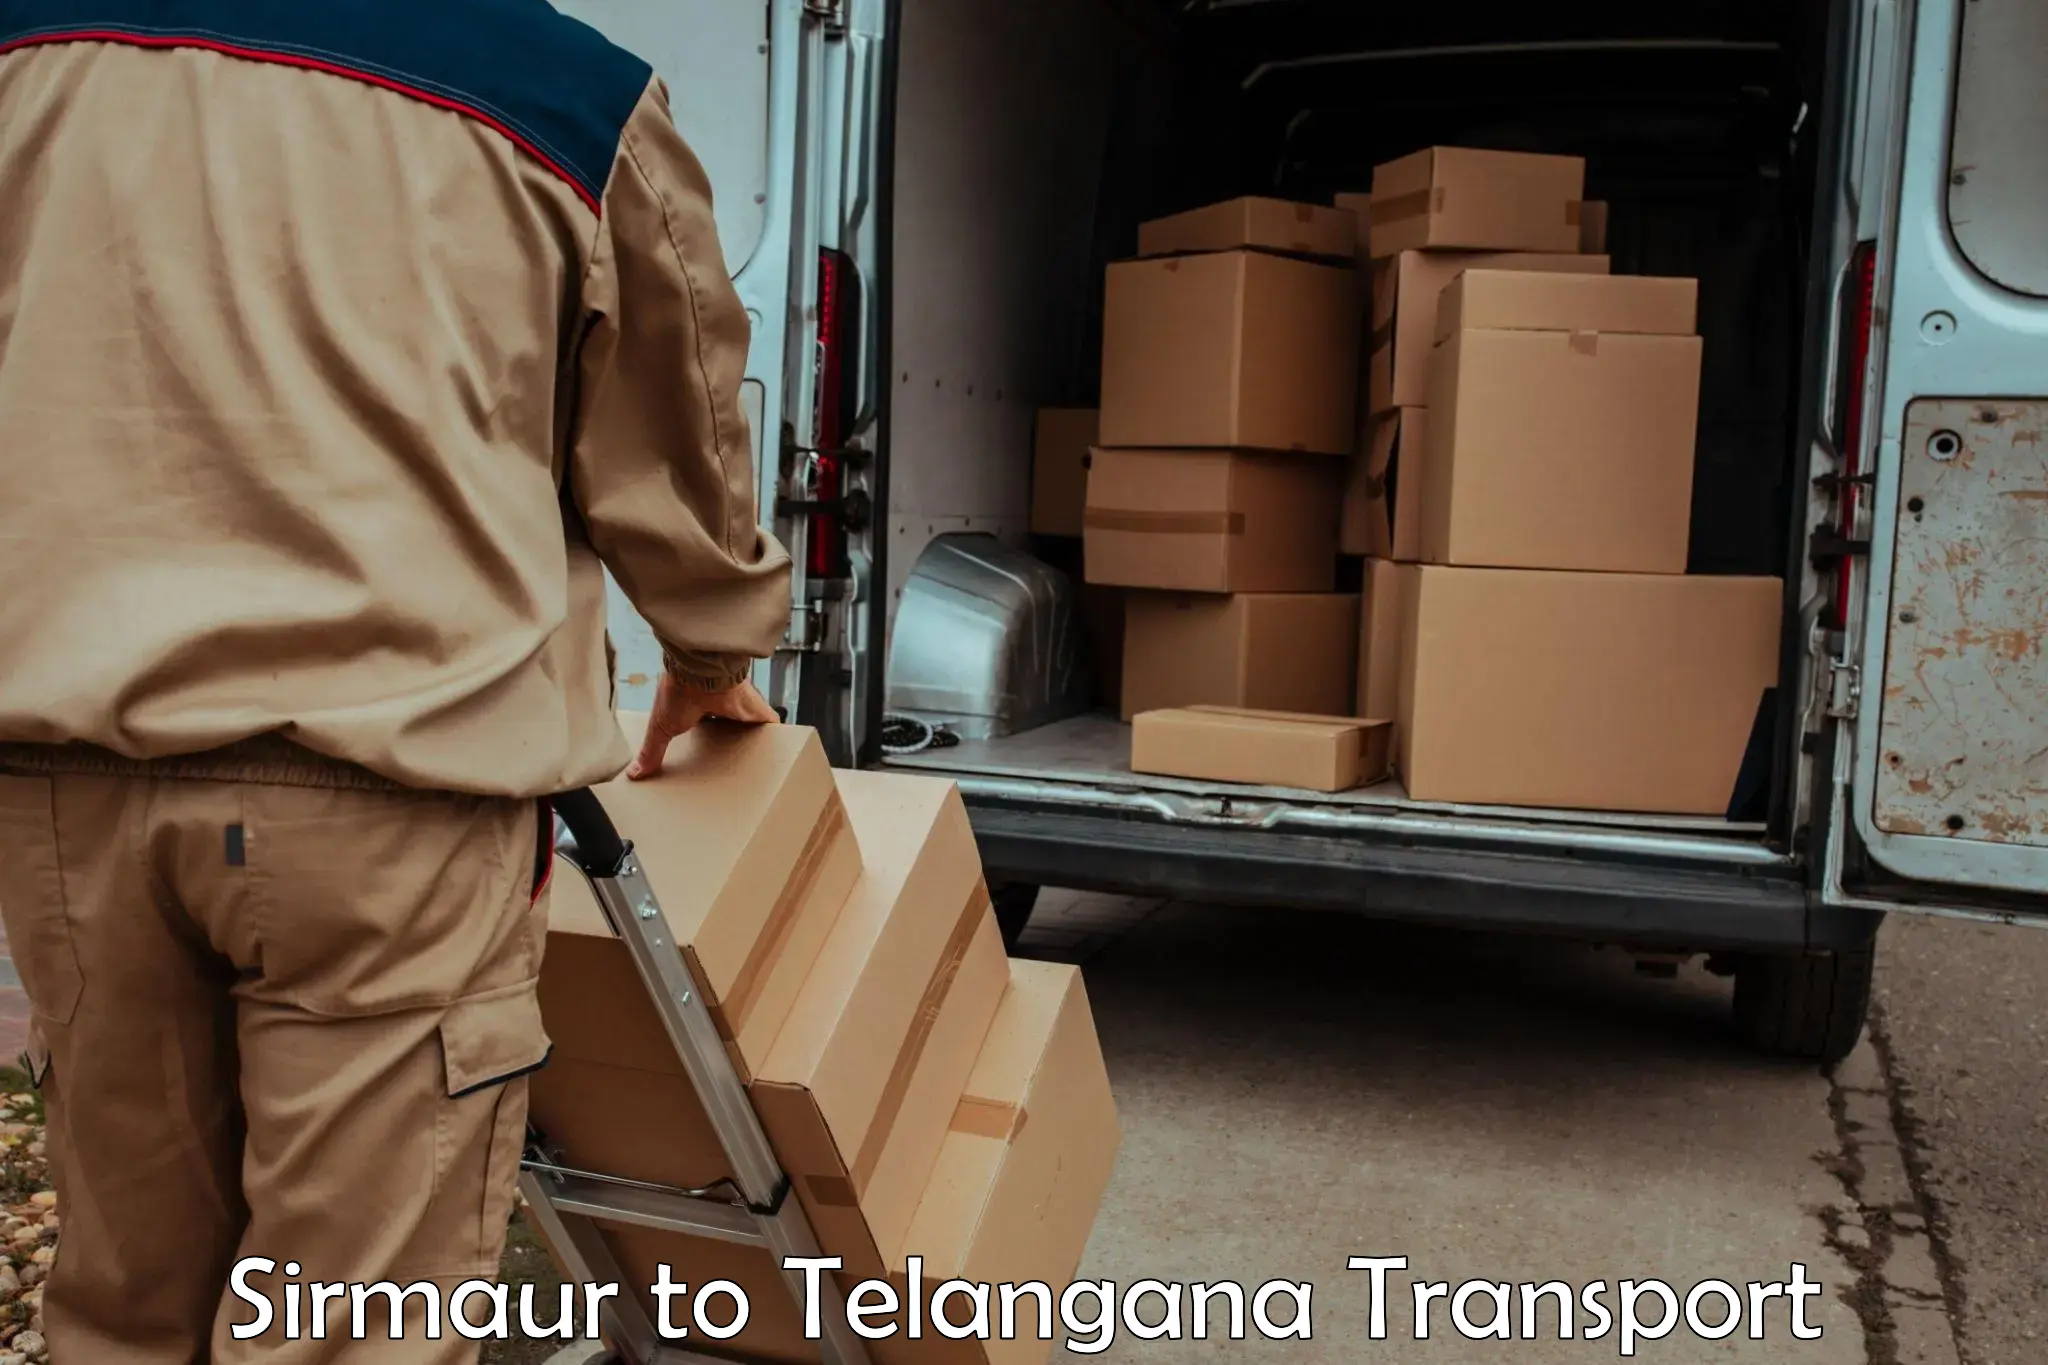 Express transport services in Sirmaur to Mancherial